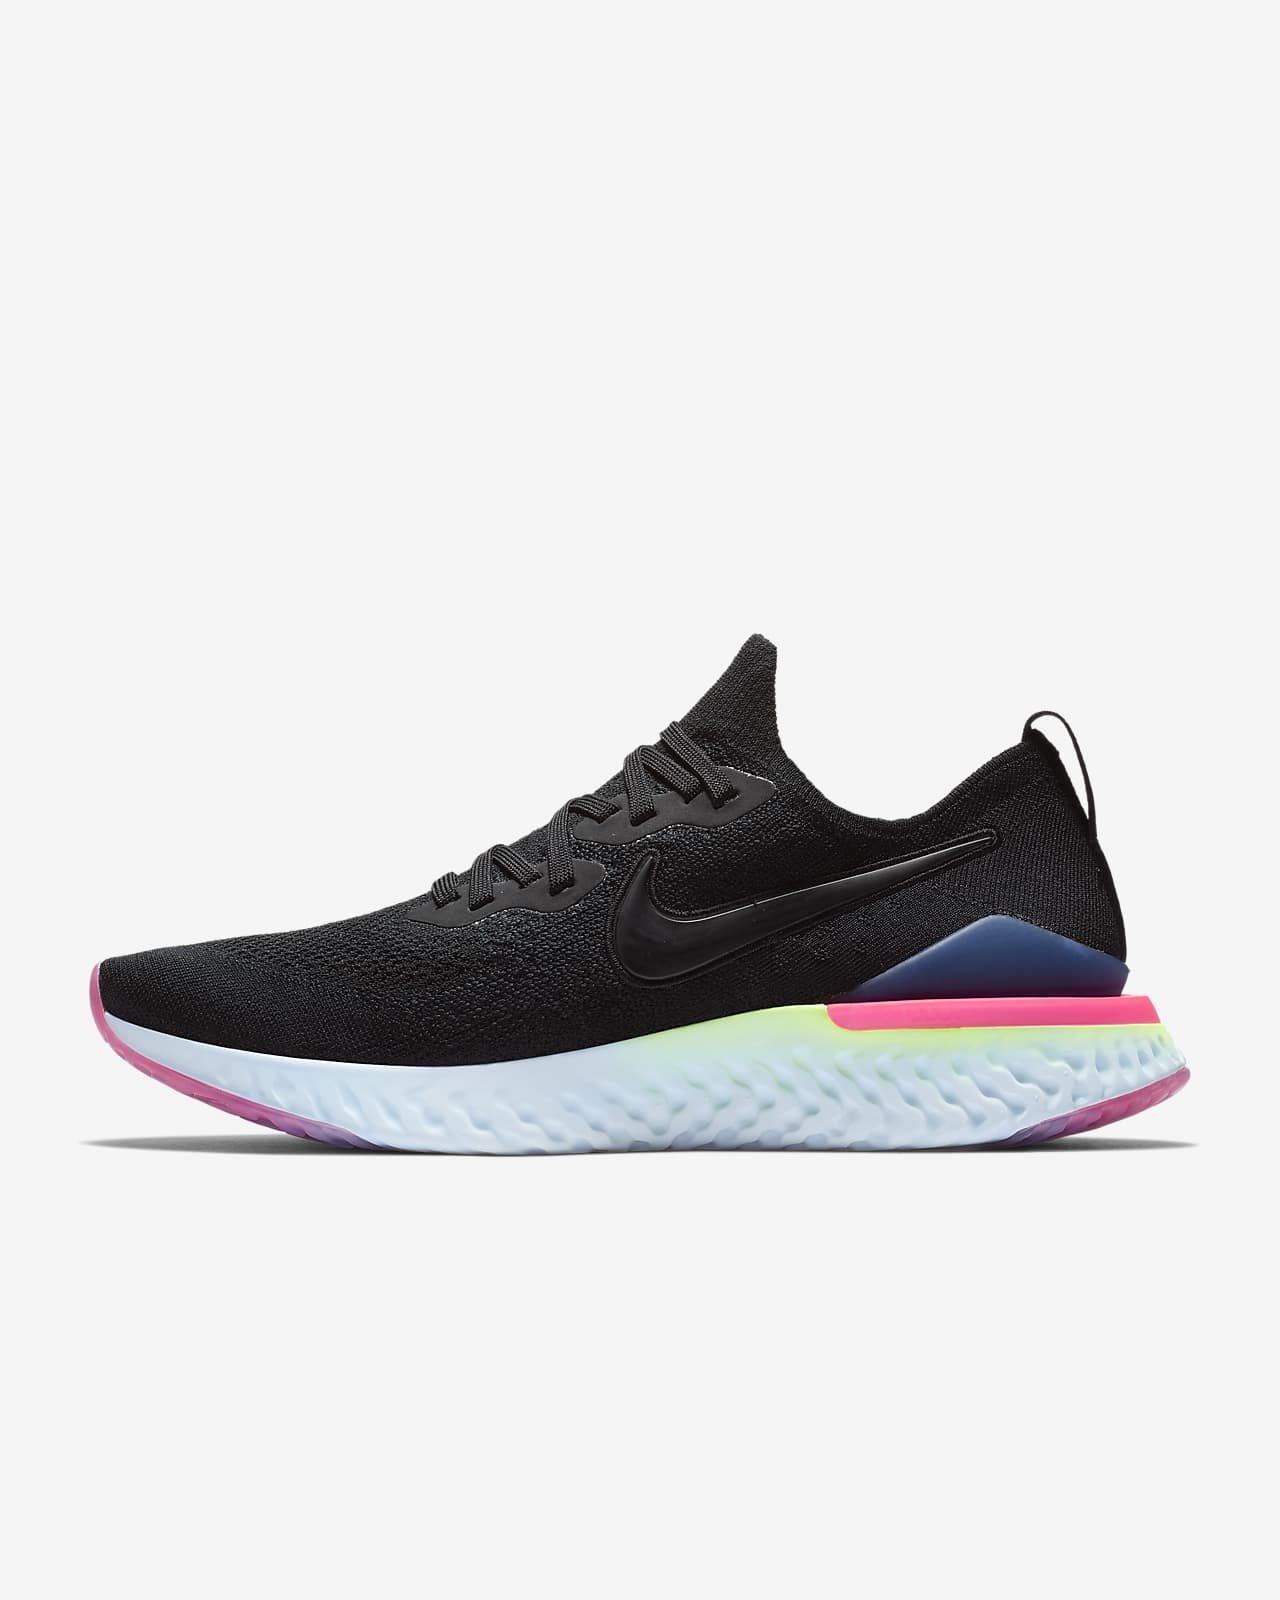 nike epic react flyknit black and grey